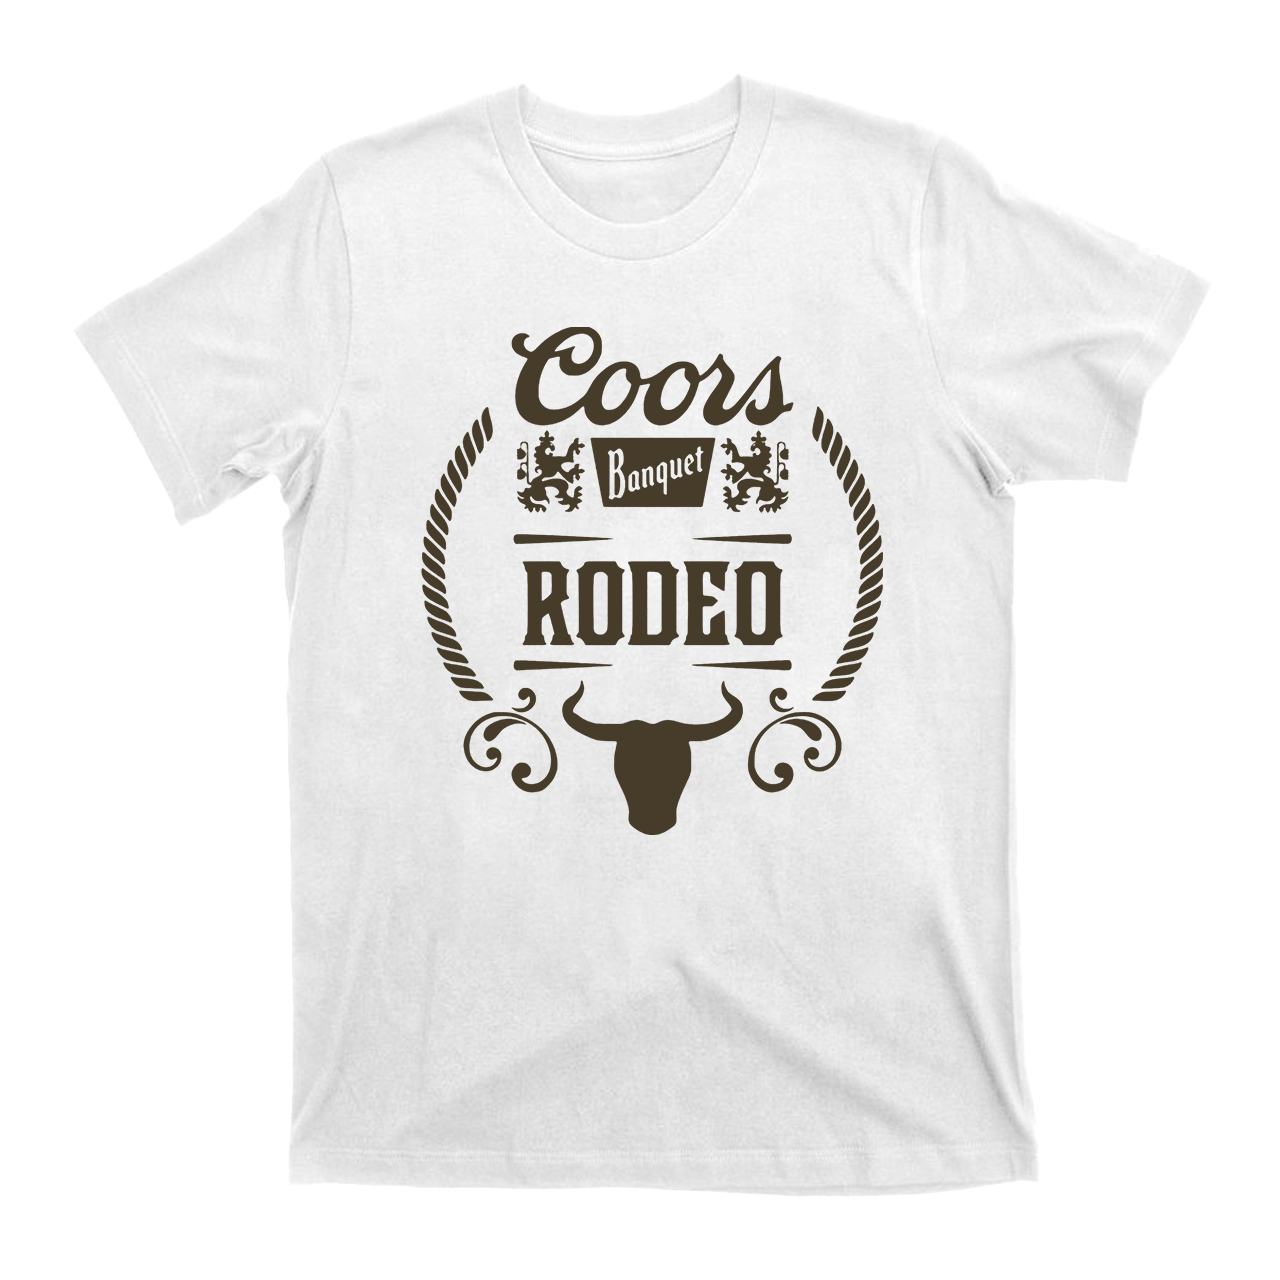 Coors Banquet Rodeo T-Shirts